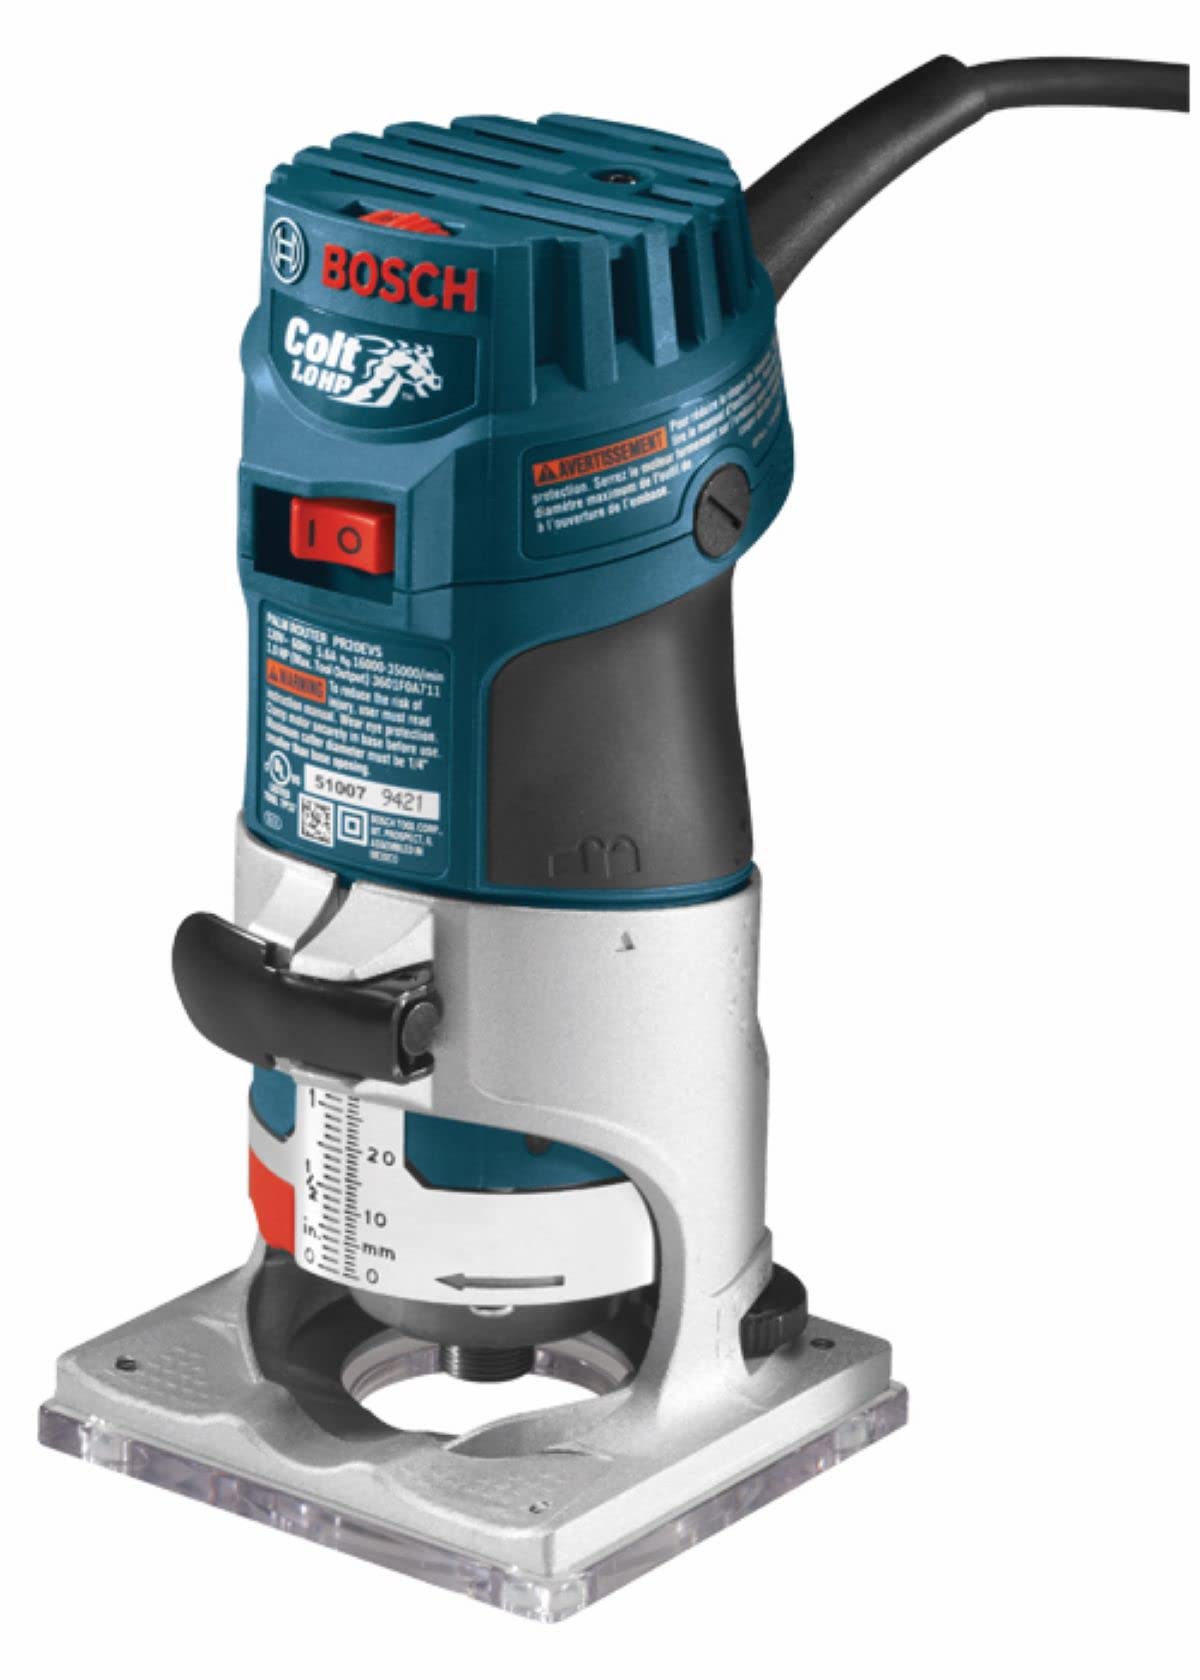 Bosch PR20EVSNK Colt Installers Kit 5.7 Amp 1 Hp Fixed-Base Variable-Speed Router with 3 Assorted Bases and Edge Guide